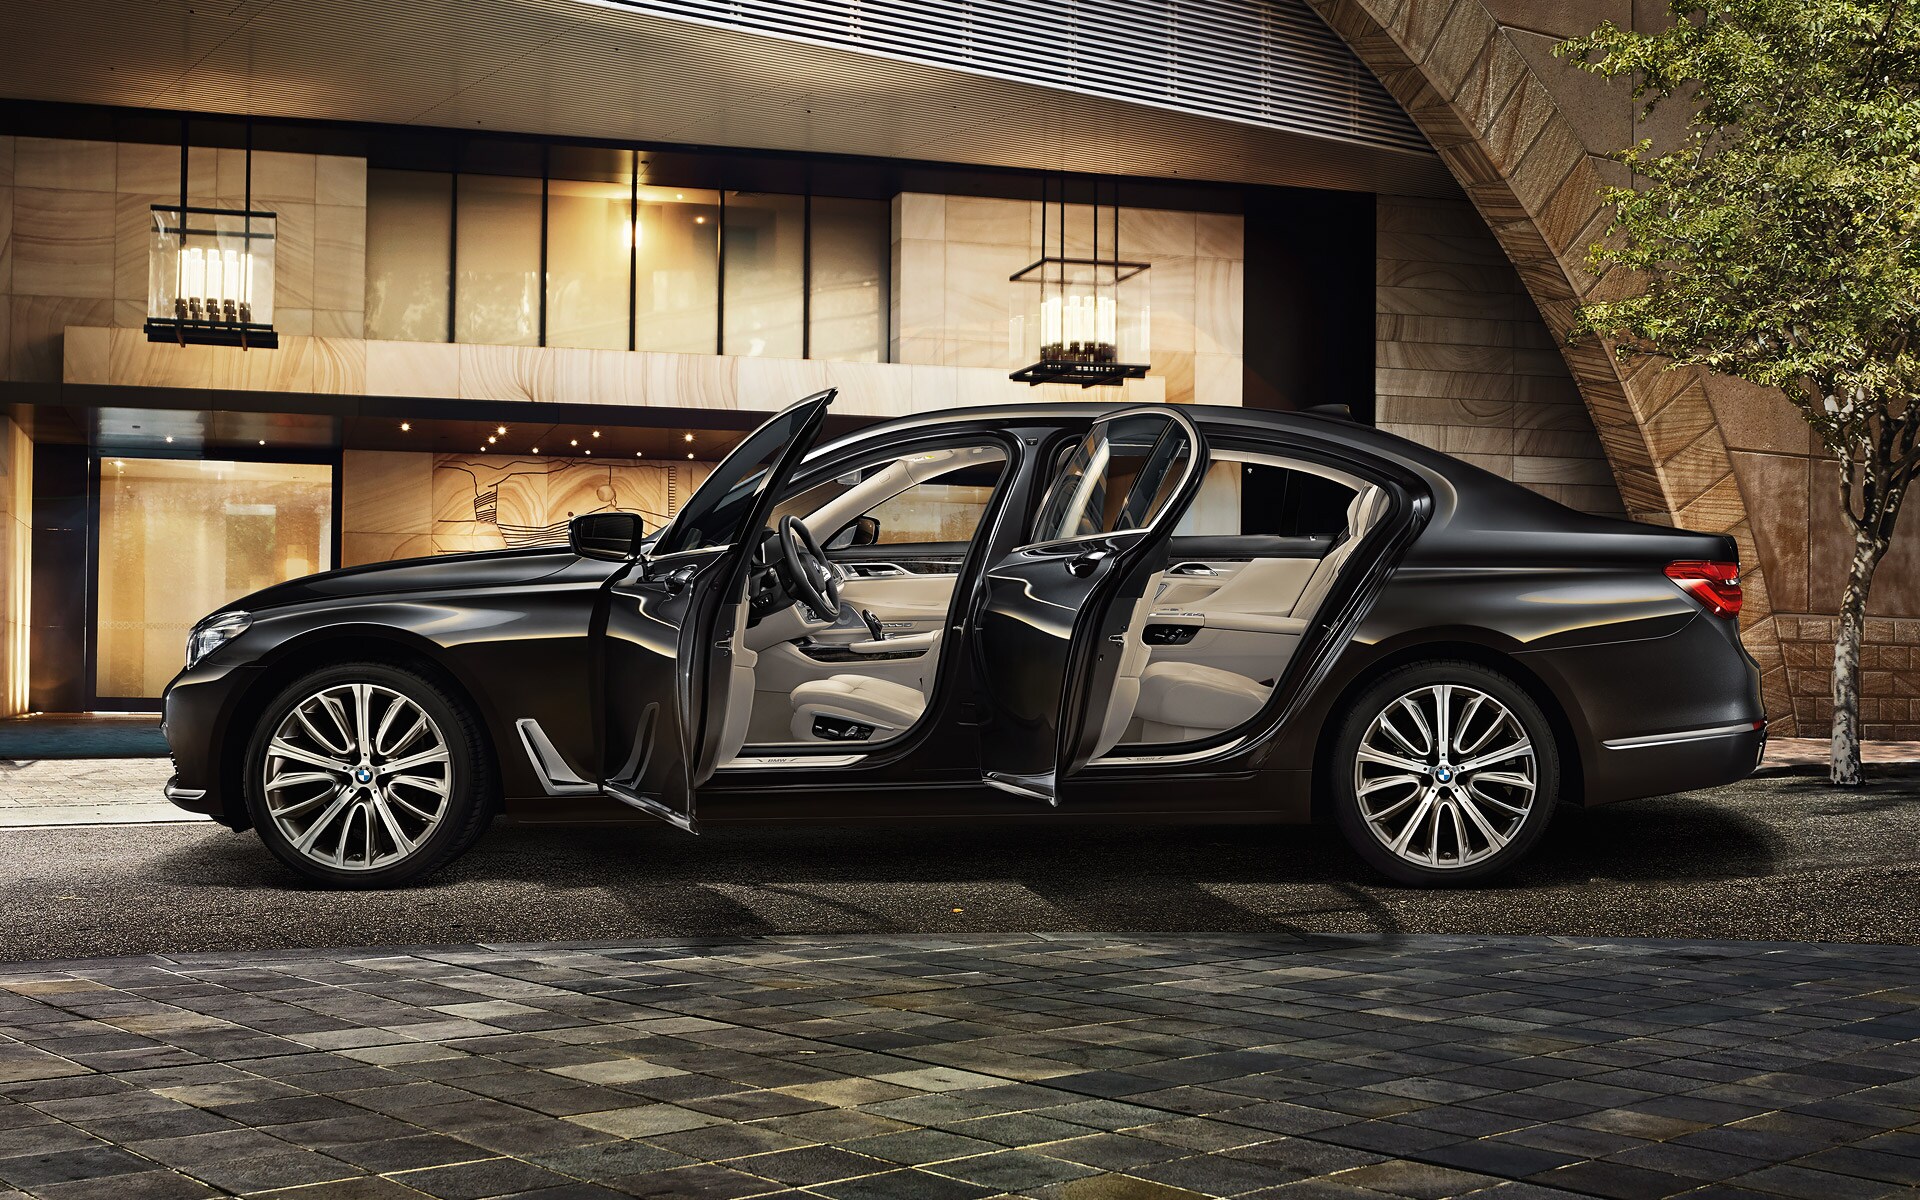 2016 BMW 7 Series | The BMW Store